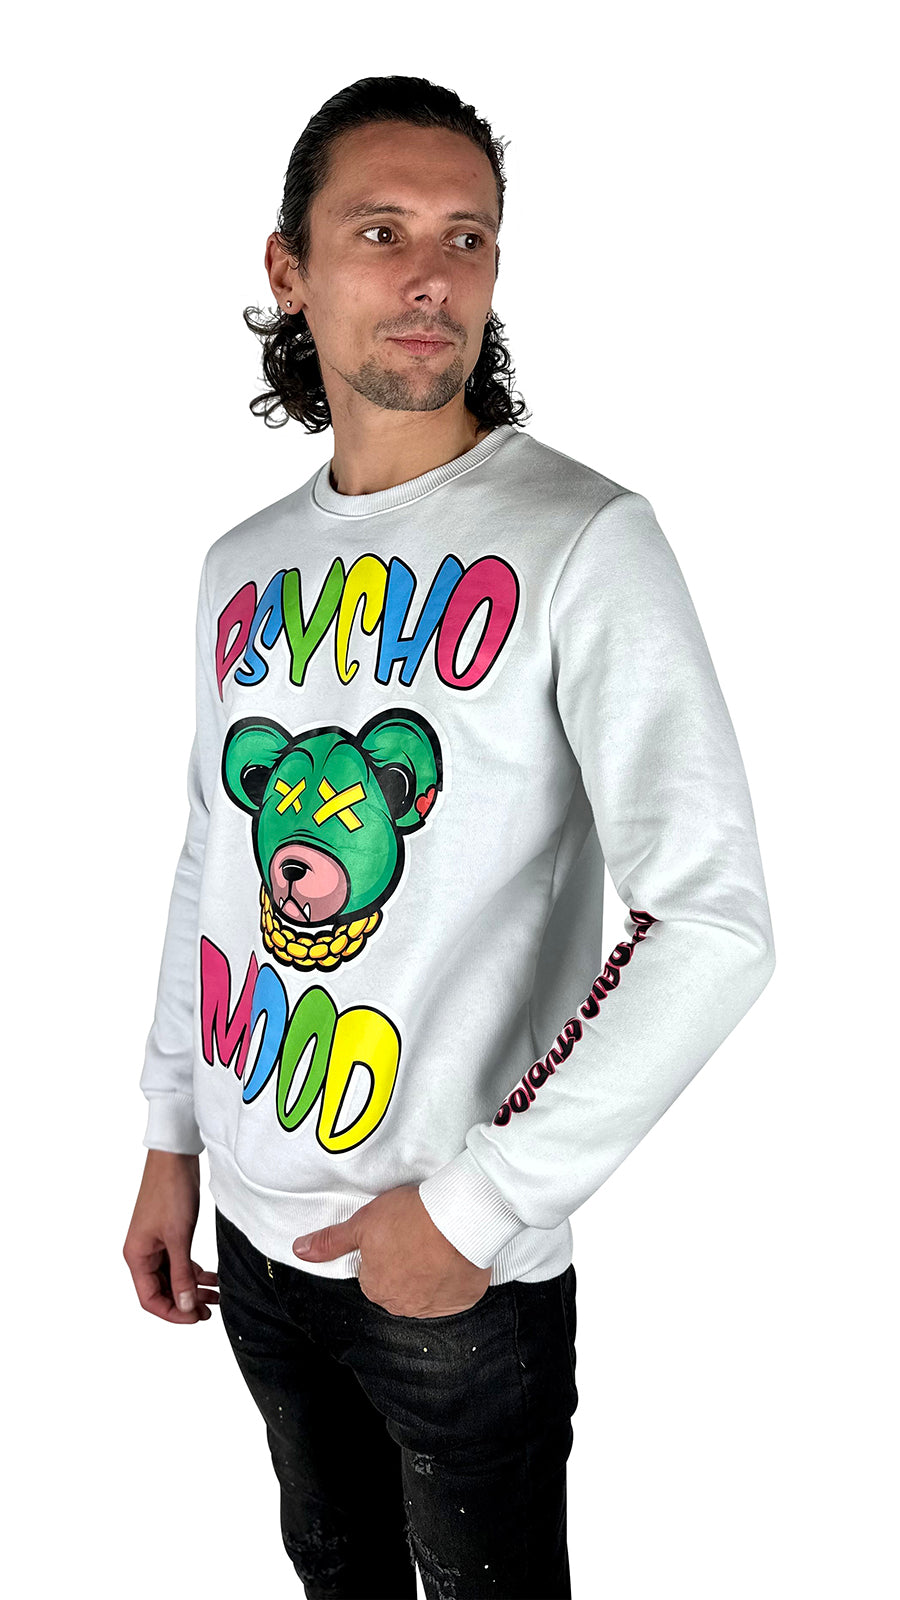 THE PSYCHO MOOD SWEATER - WHITE